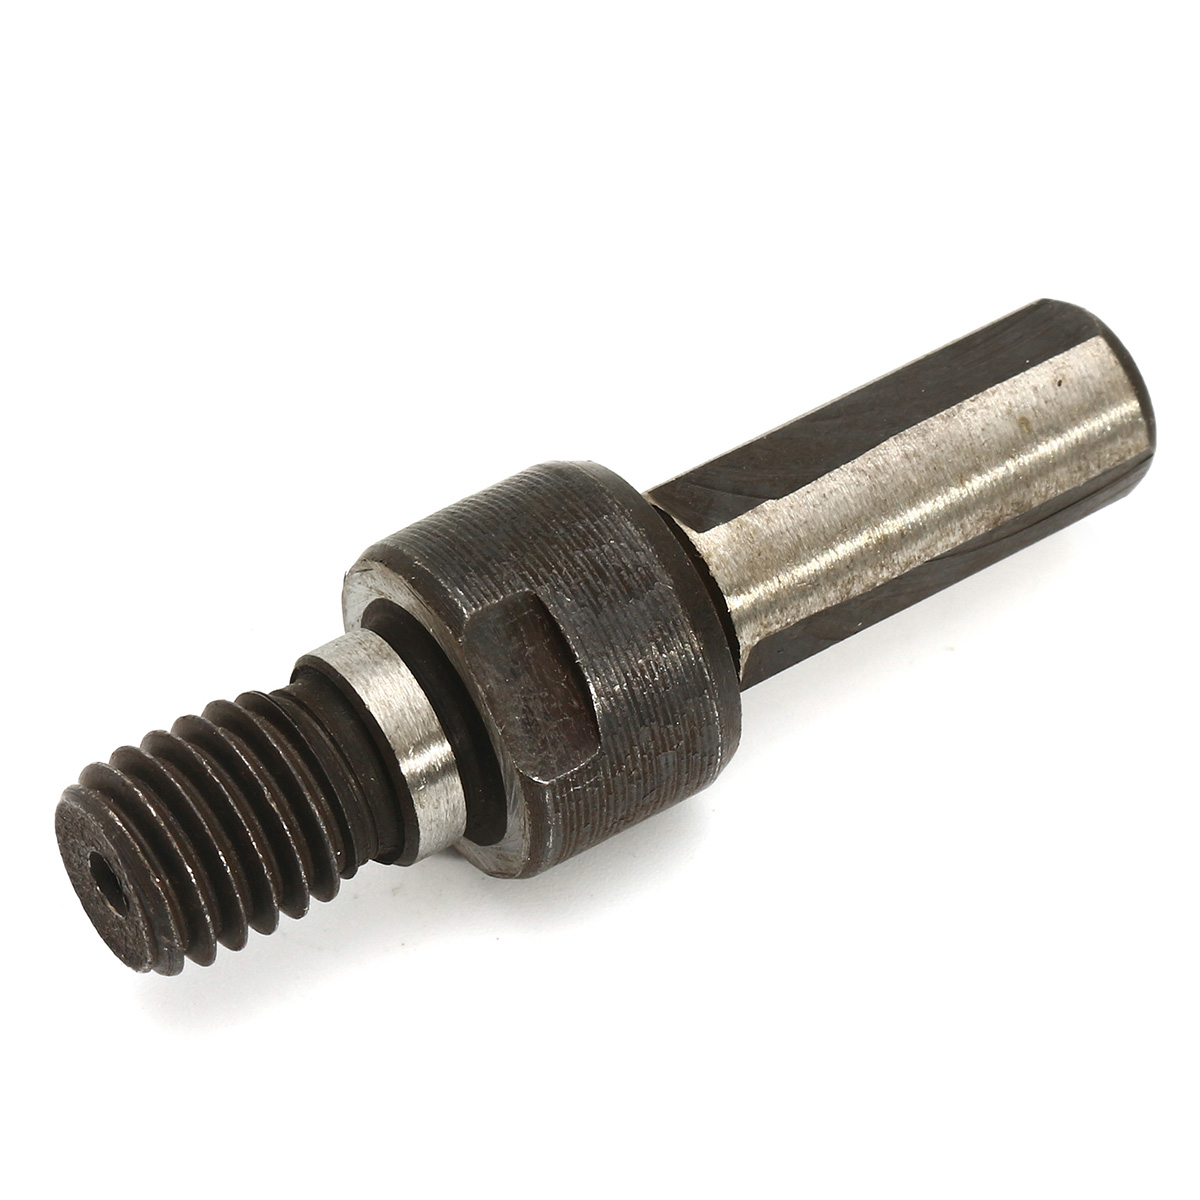 10mm-Shank-M10-Arbor-Mandrel-Adapter-Cutting-Tool-Accessories-for-Angle-Grinder-1296029-6